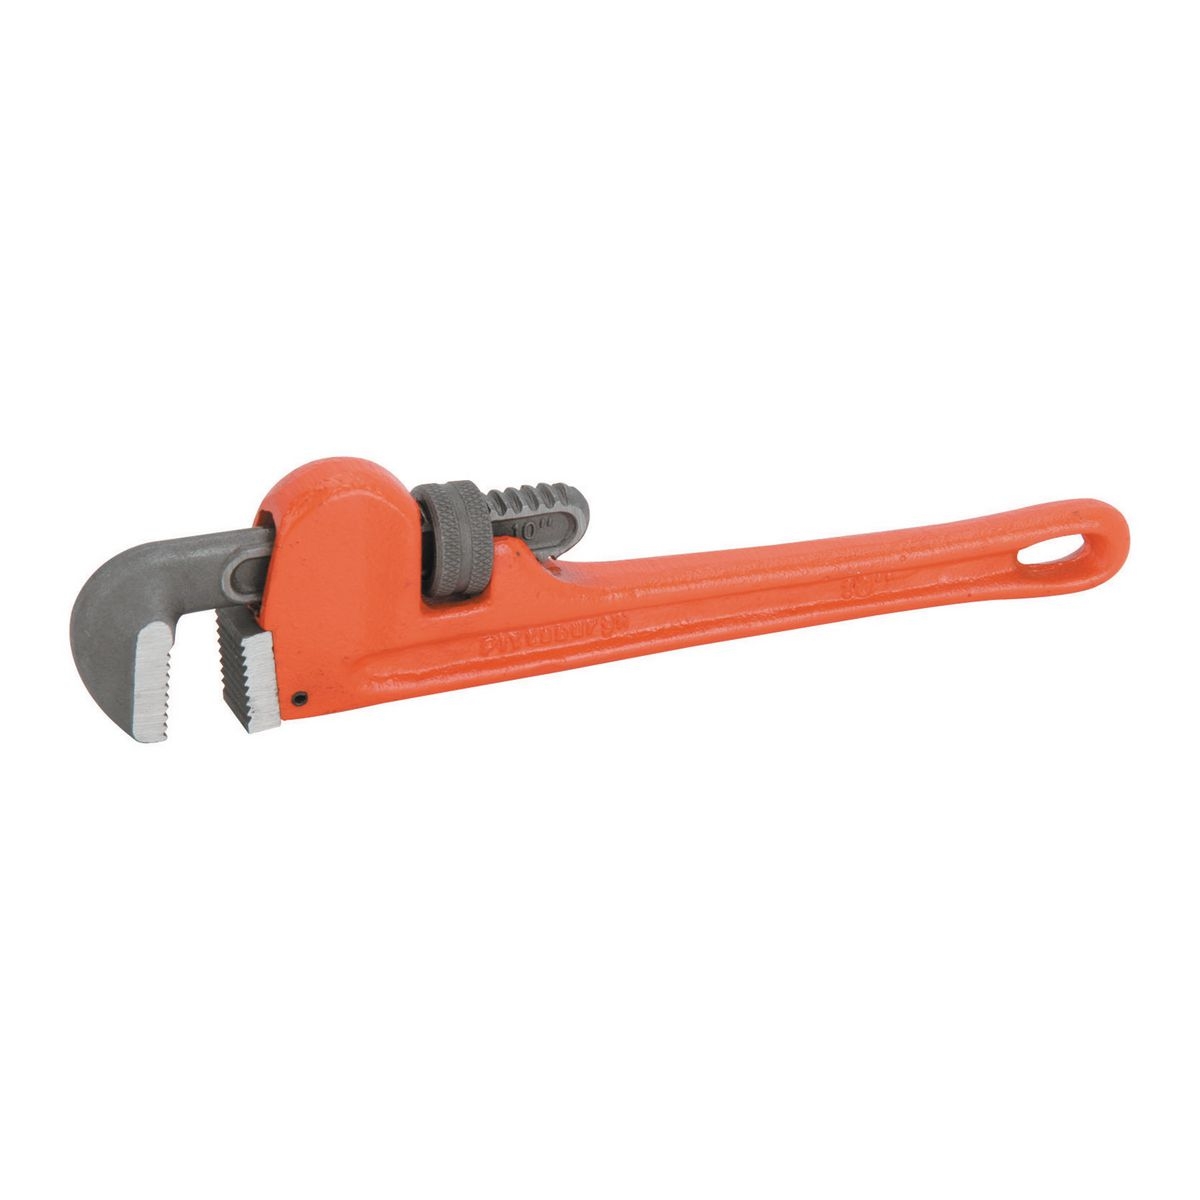 PITTSBURGH 10 in. Steel Pipe Wrench - Item 39642 / 61465